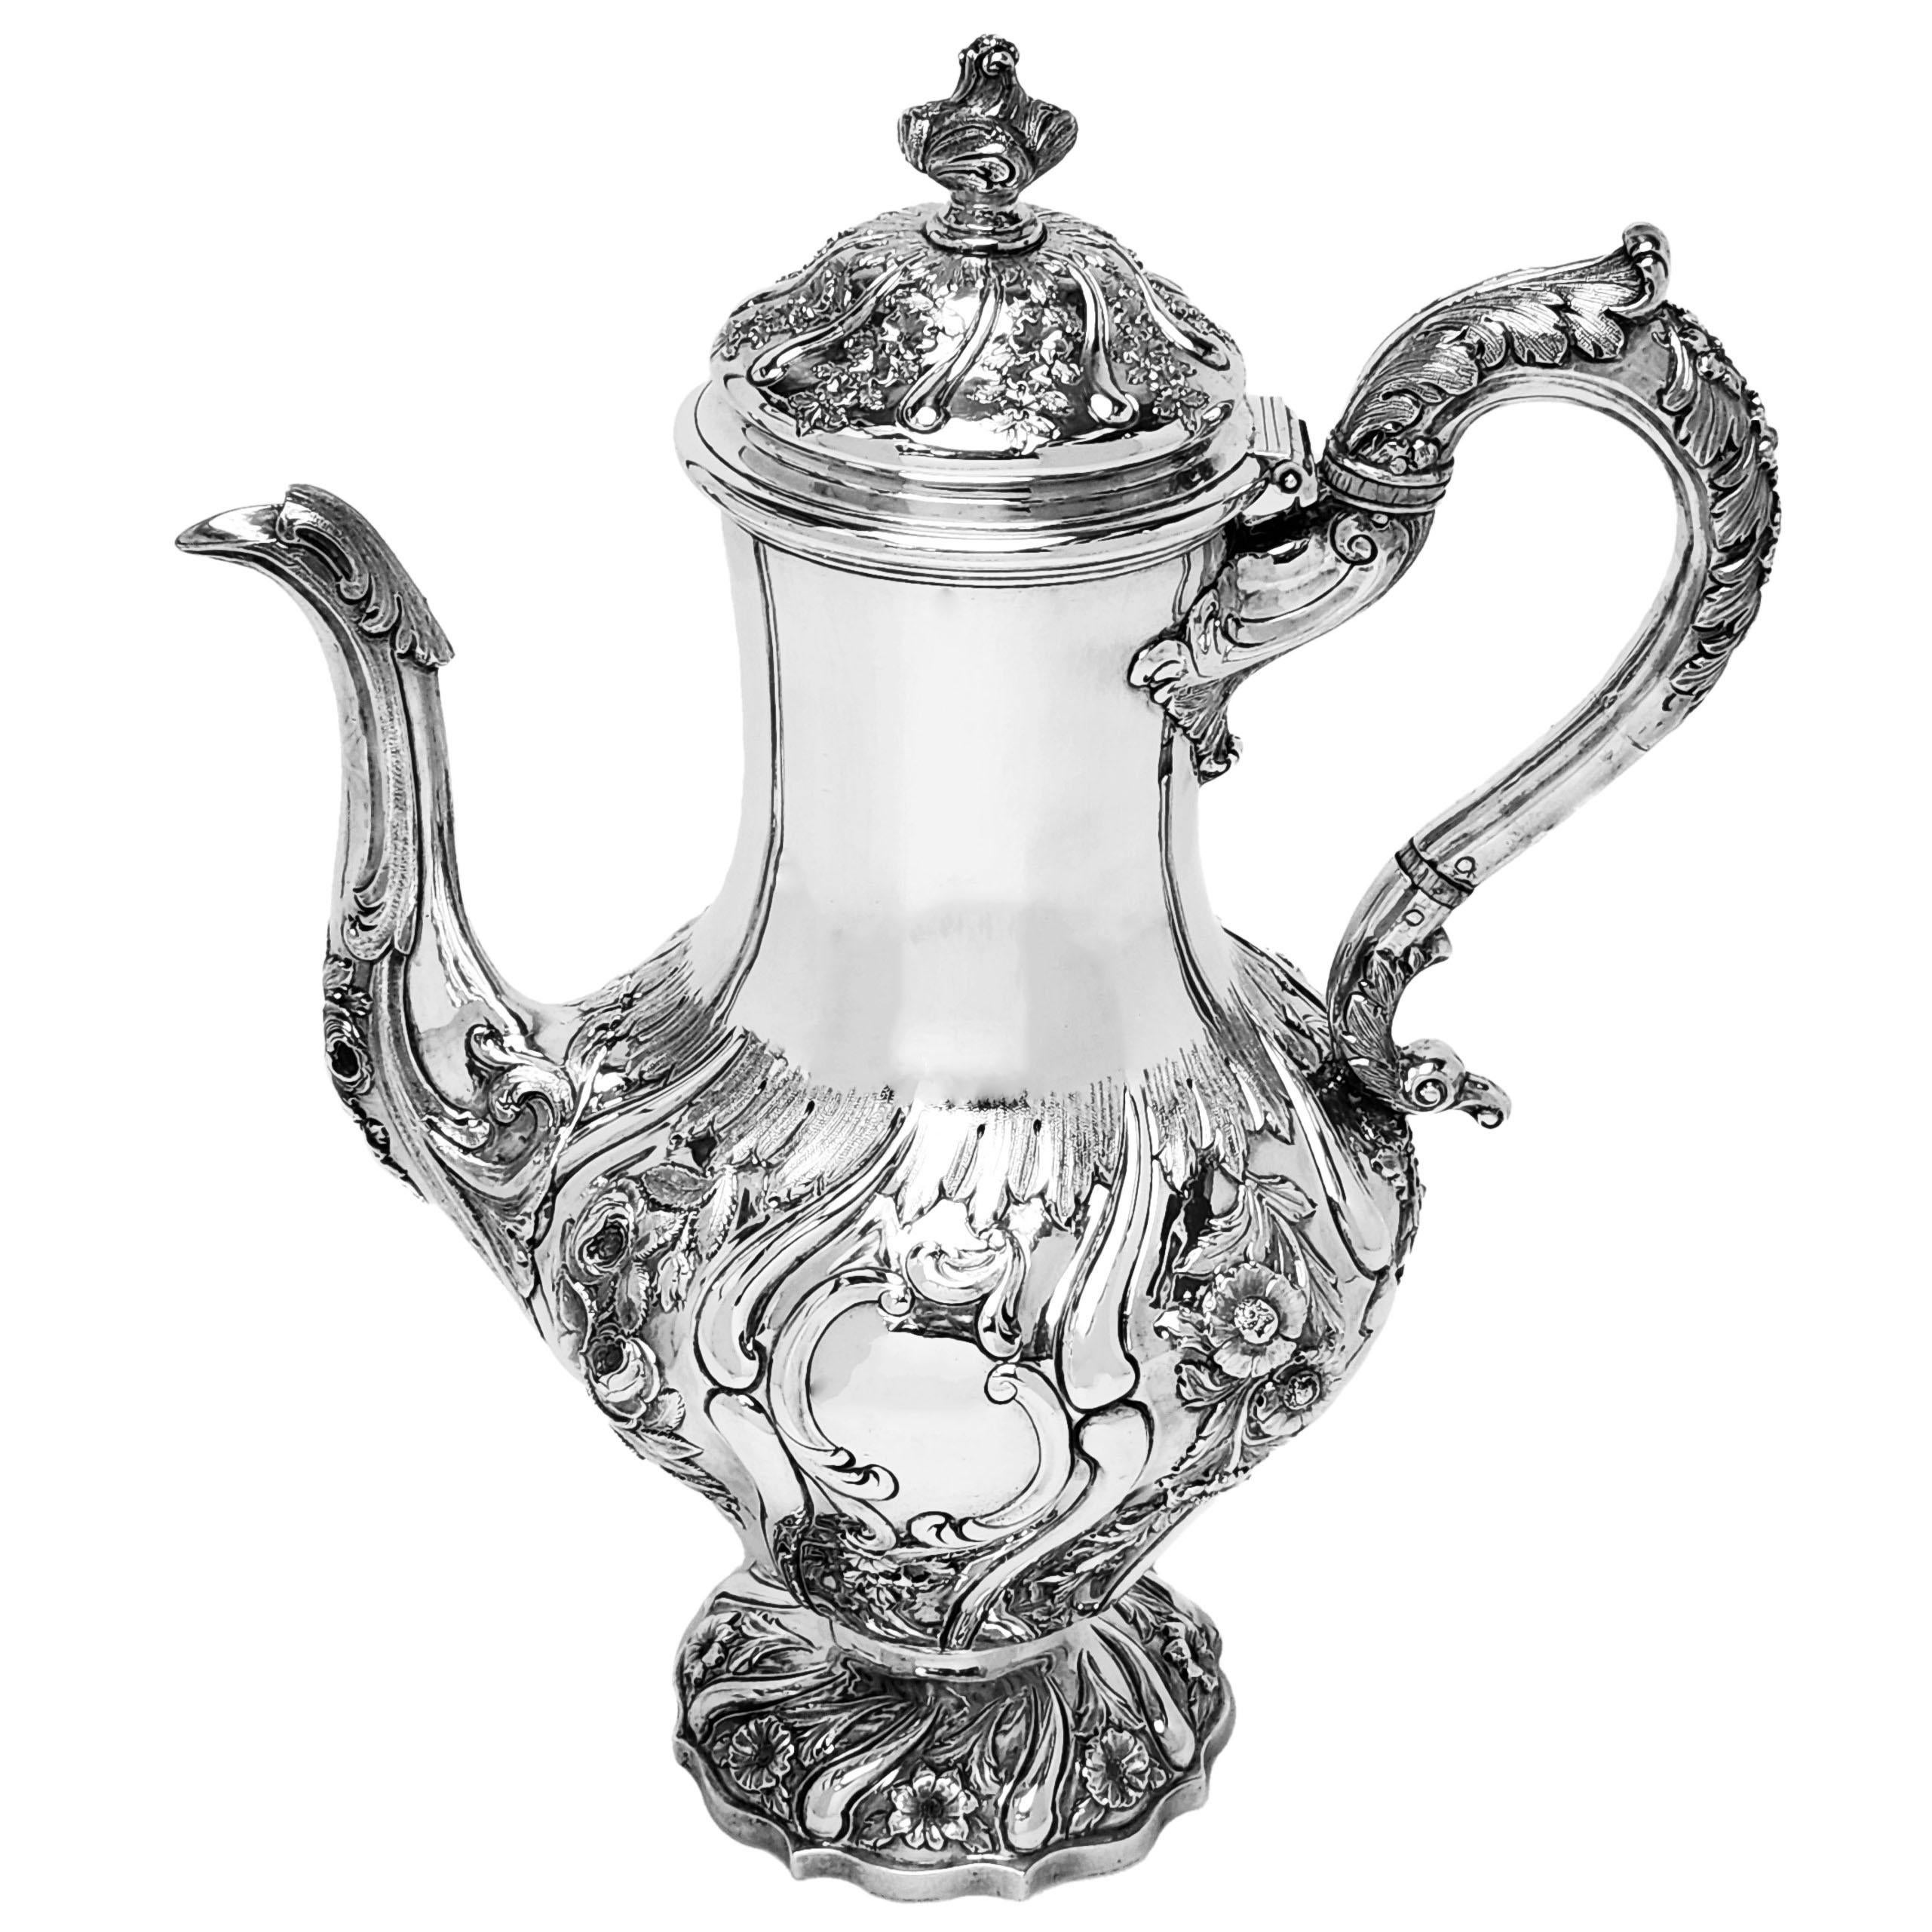 A lovely Antique Victorian Scottish Silver four piece Tea & Coffee Set with in a classic baluster shape. Each piece of this Tea Set is embellished with a  gorgeous floral and scroll chased patterns and acanthus leaf patterning on the scroll handles.